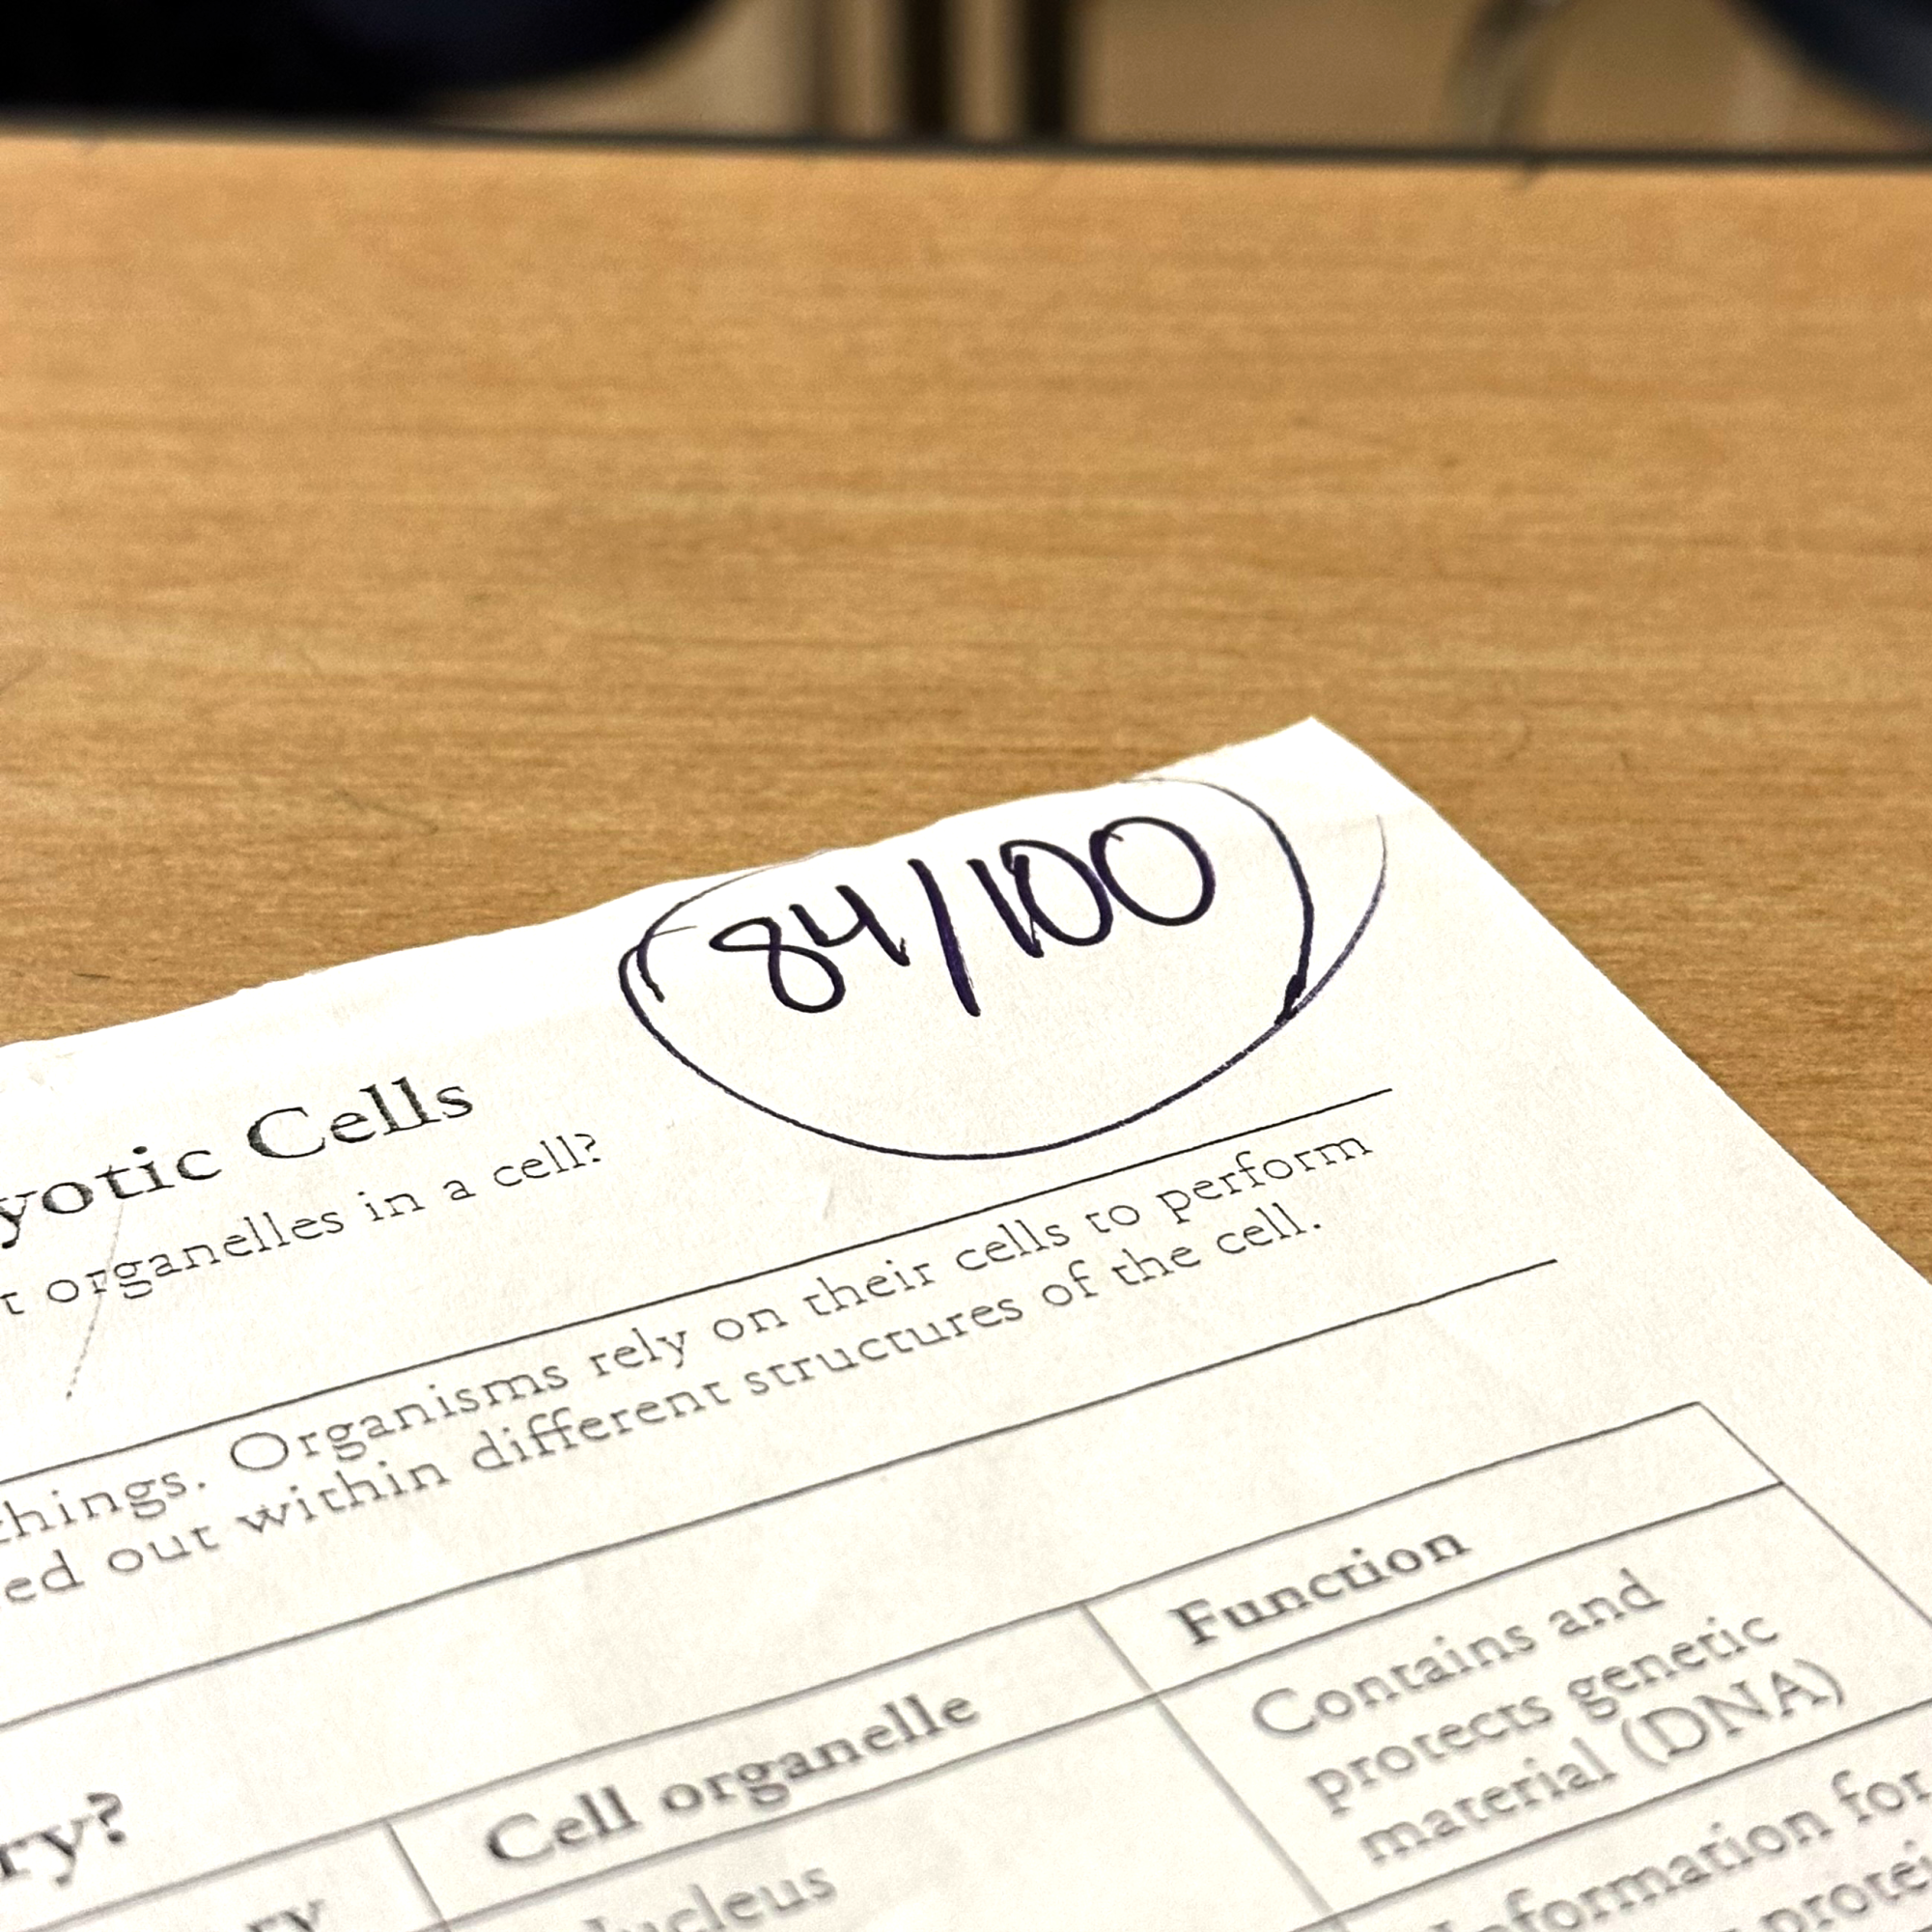 South High is undergoing a conversion to a more uniform grading scale known as “the 80/20 system.” With this abrupt change, many people have been left with a lack of information about the transition in between grading systems. This change has caused lots of controversy among staff and students.